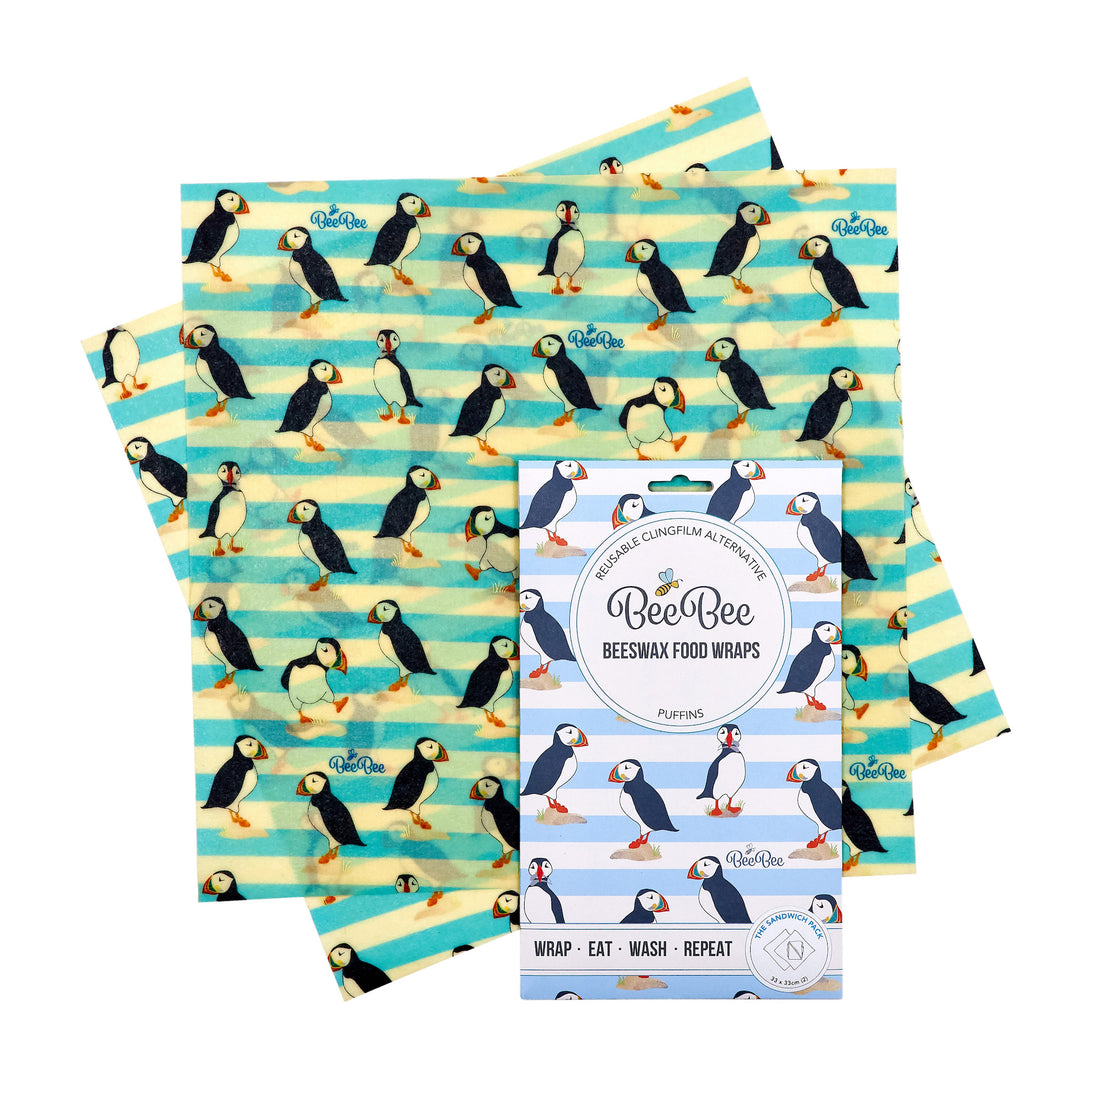 Beeswax Sandwich Wraps (Puffins)